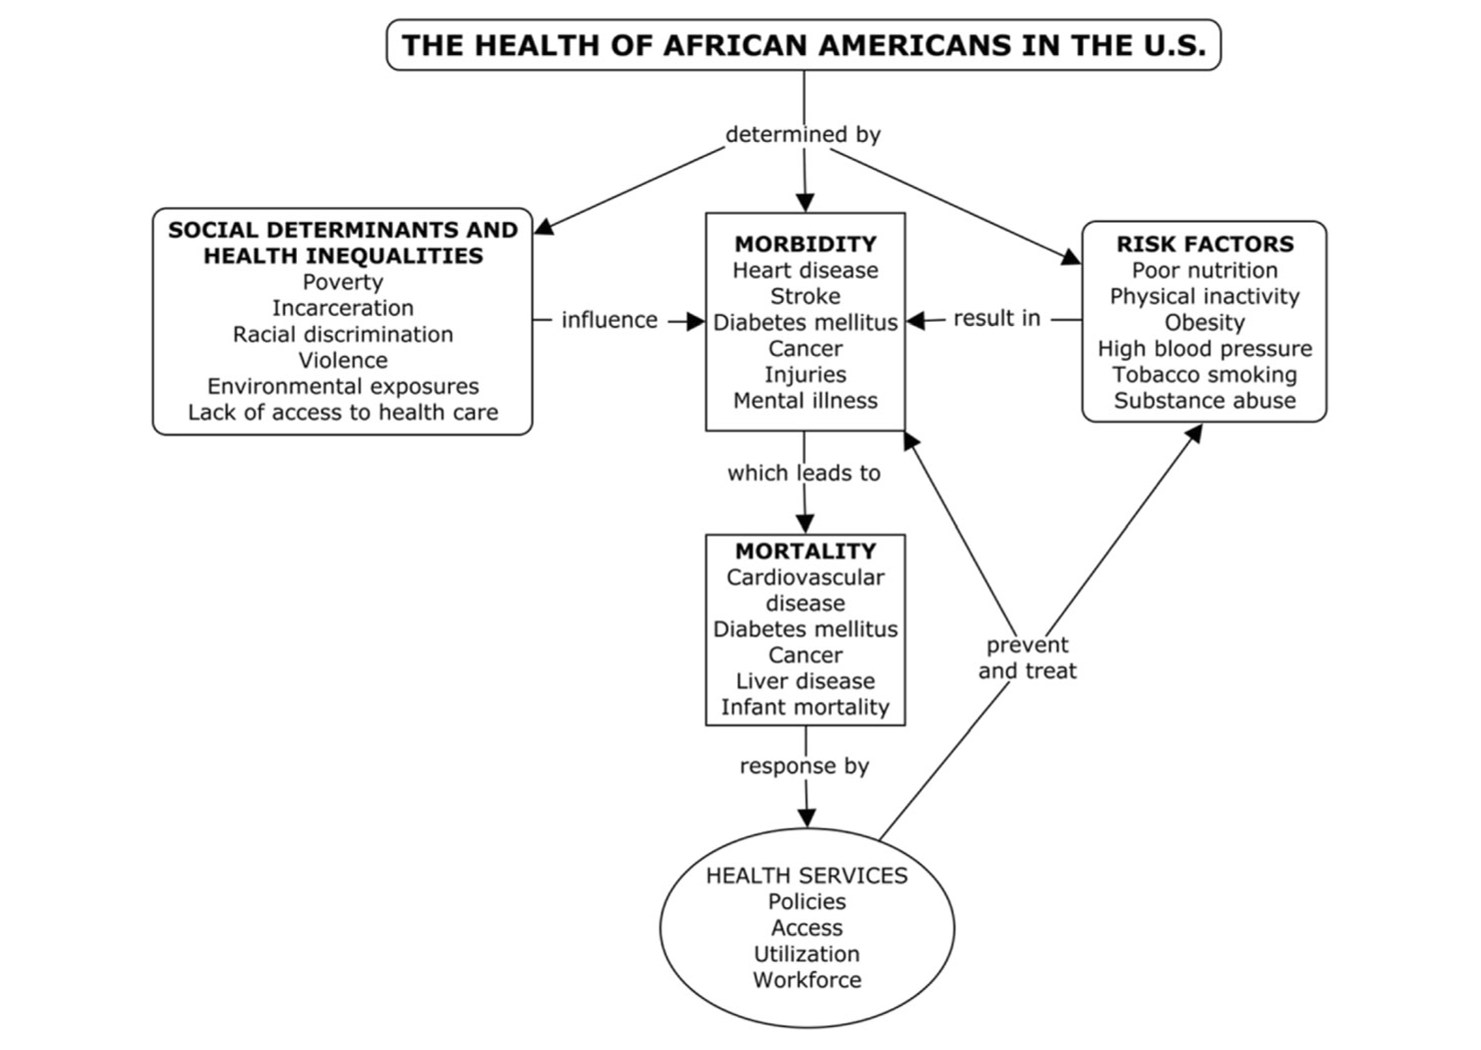 497-healthafrican-americans.png